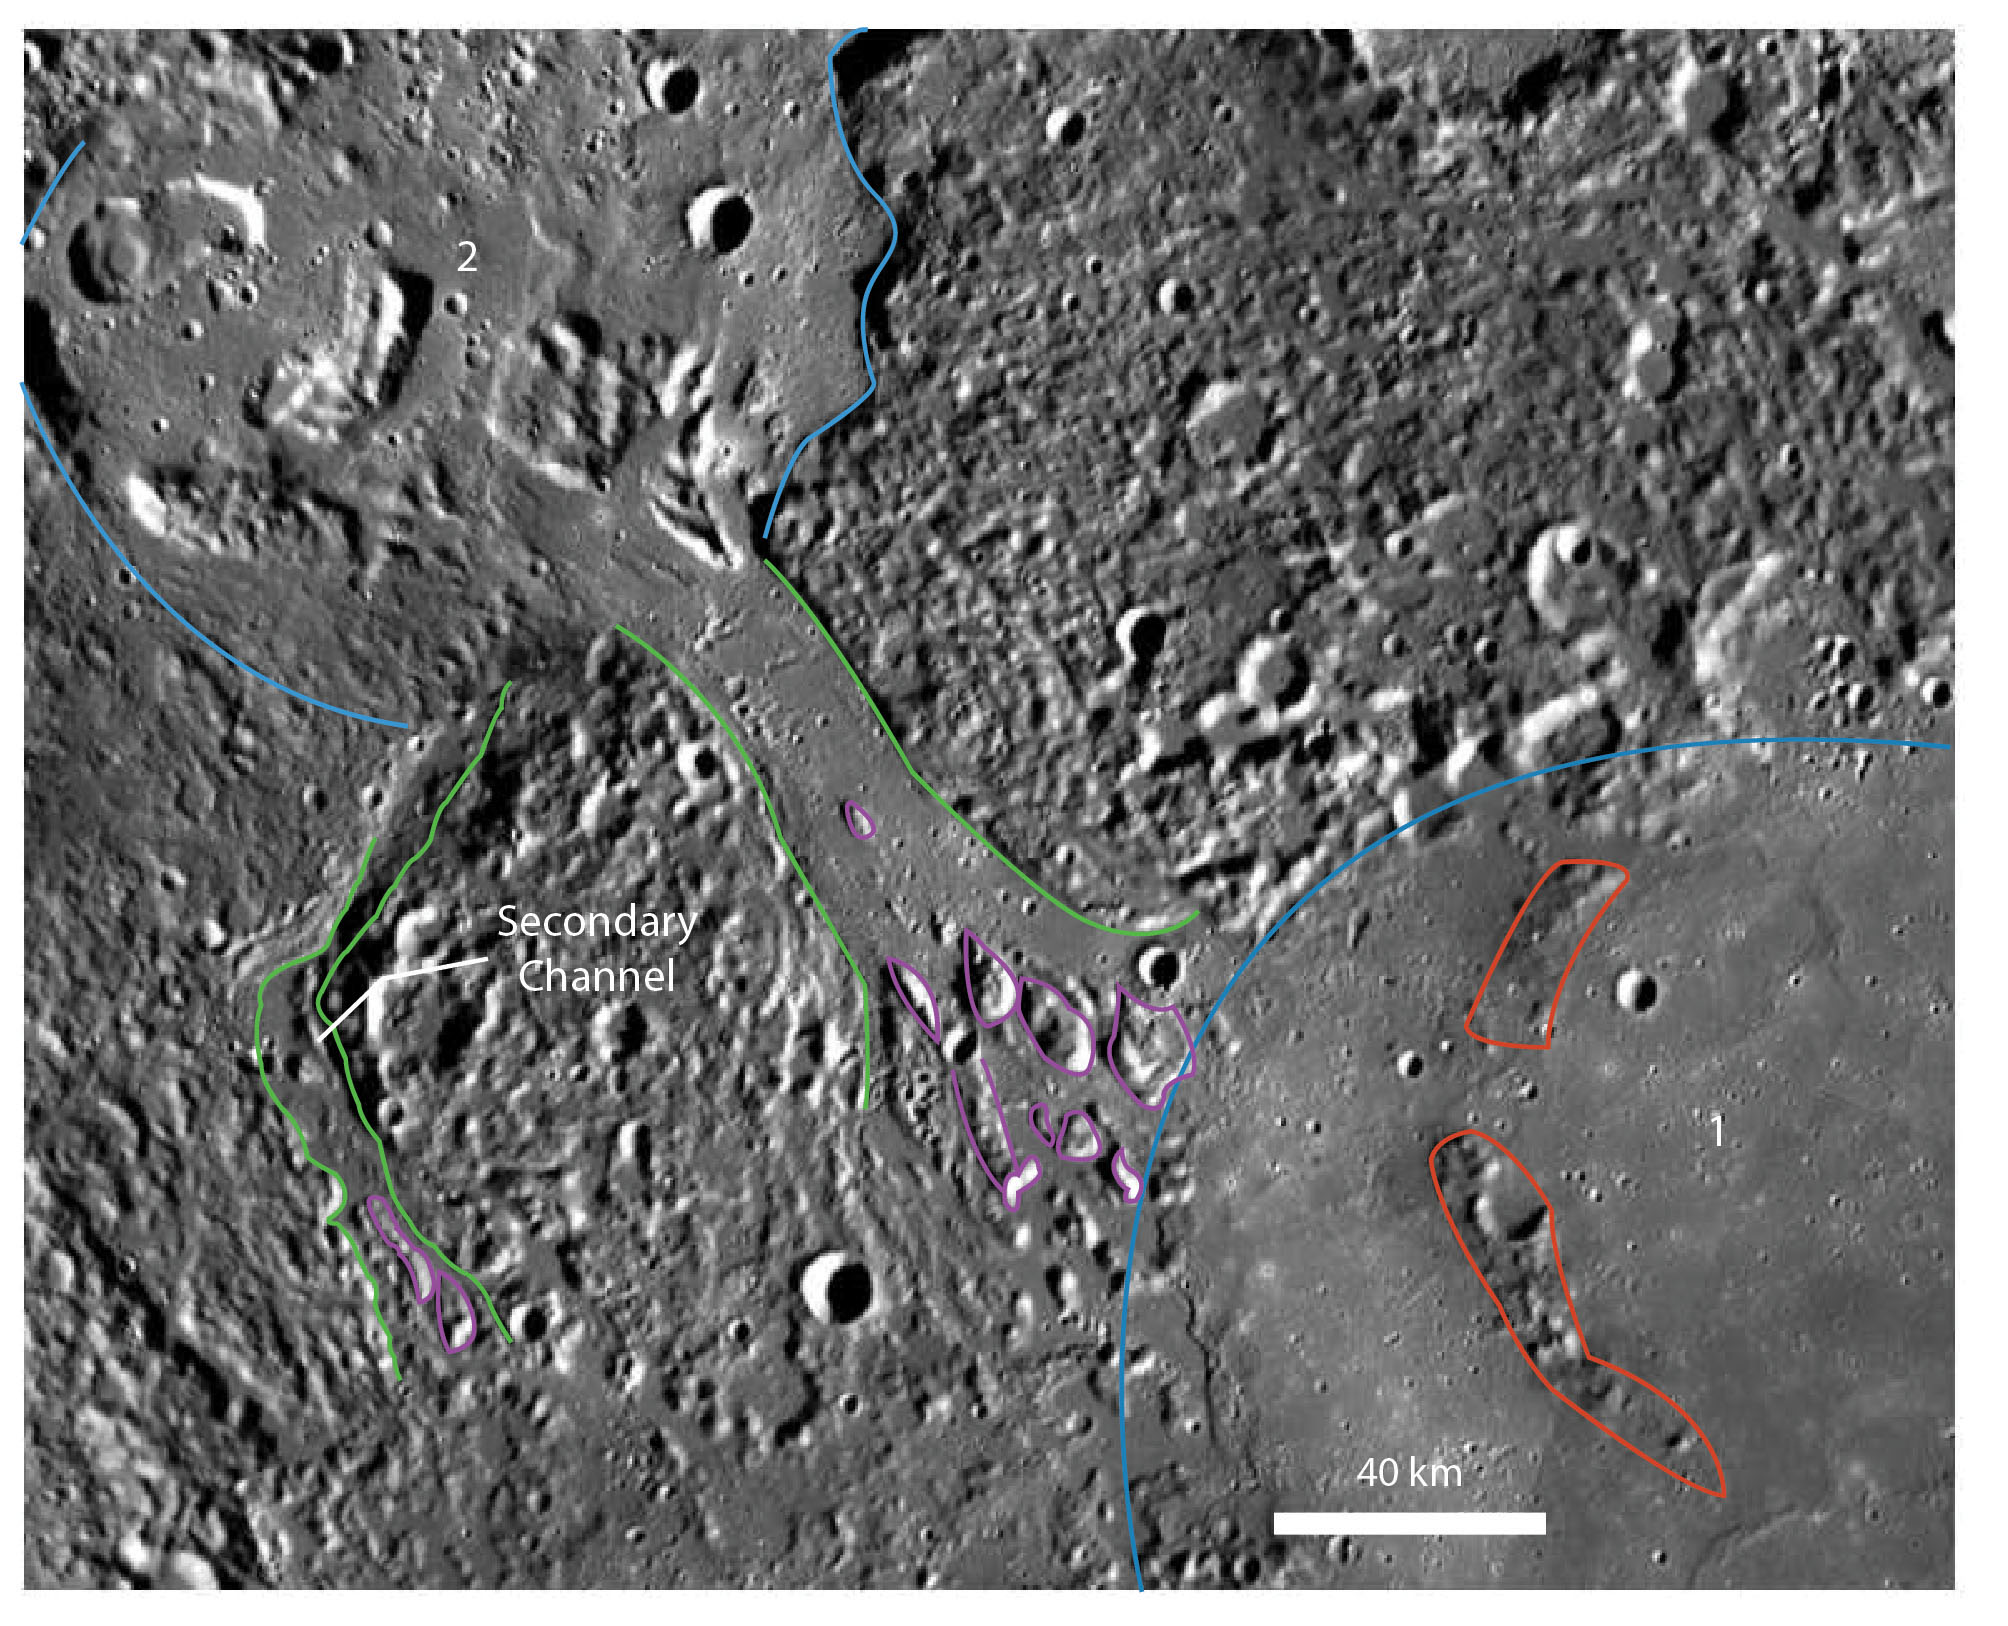 why do we think mercury has so many tremendous cliffs